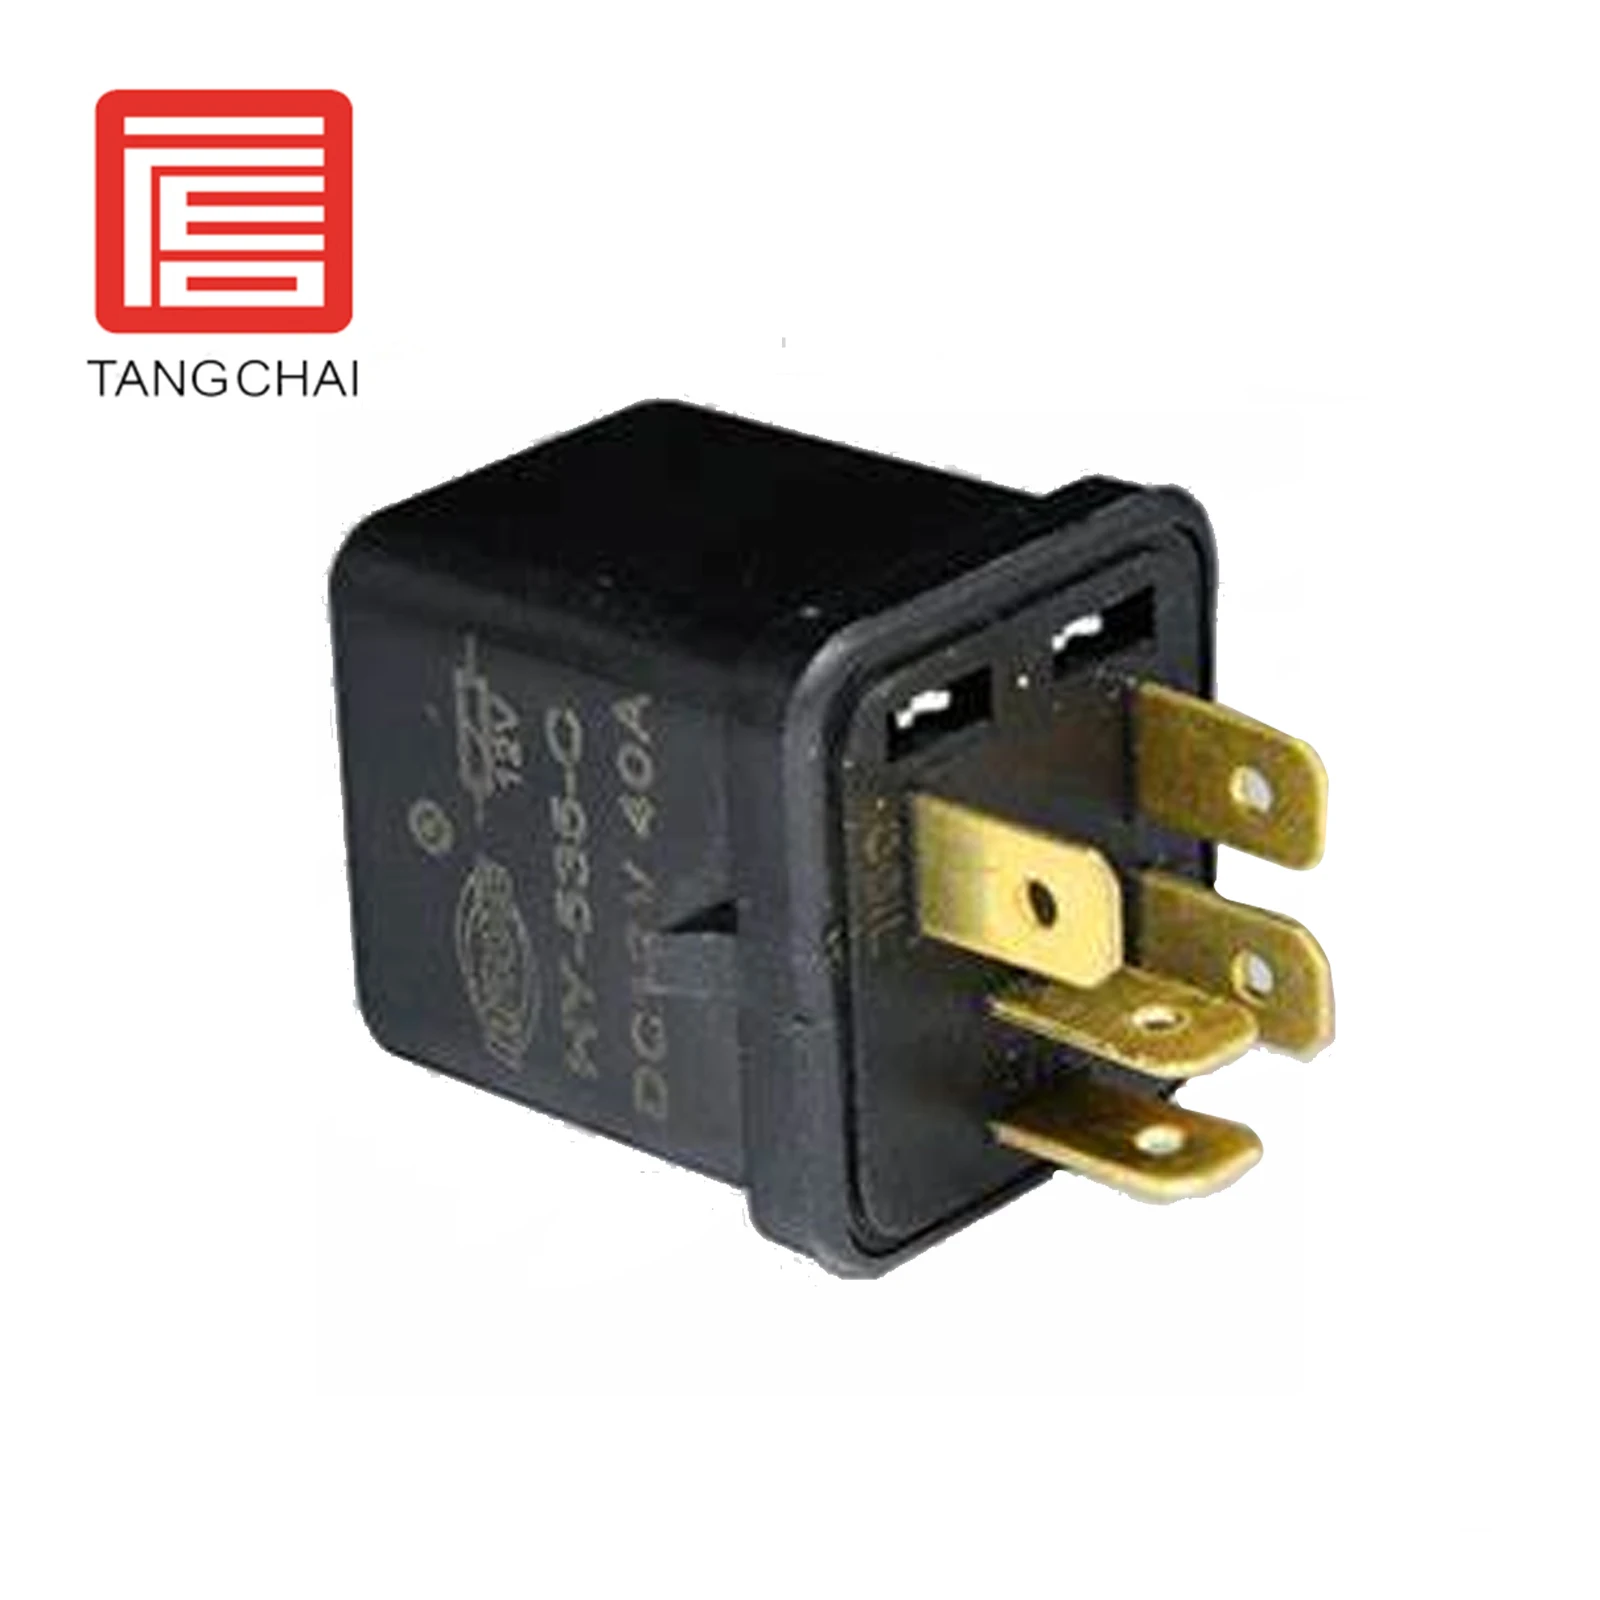 

Tangchai Relay Suitable for 8-94235627-0 8-97036359-1 25230-W1300 25230-C9900